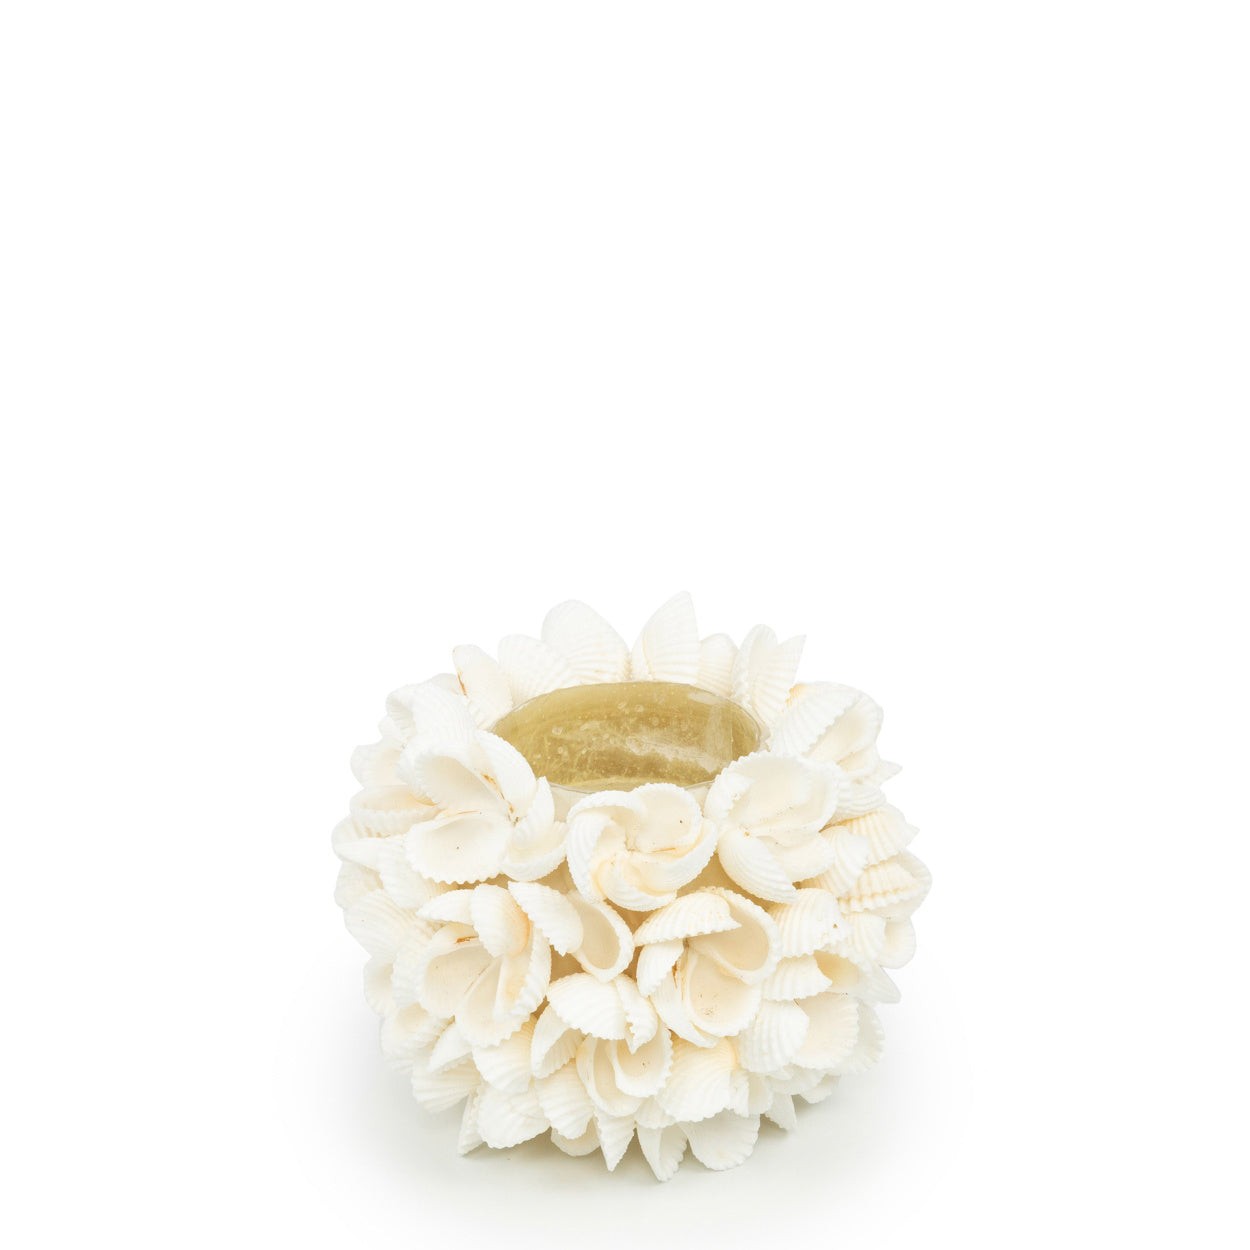 THE FLOWER POWER Candle Holder small